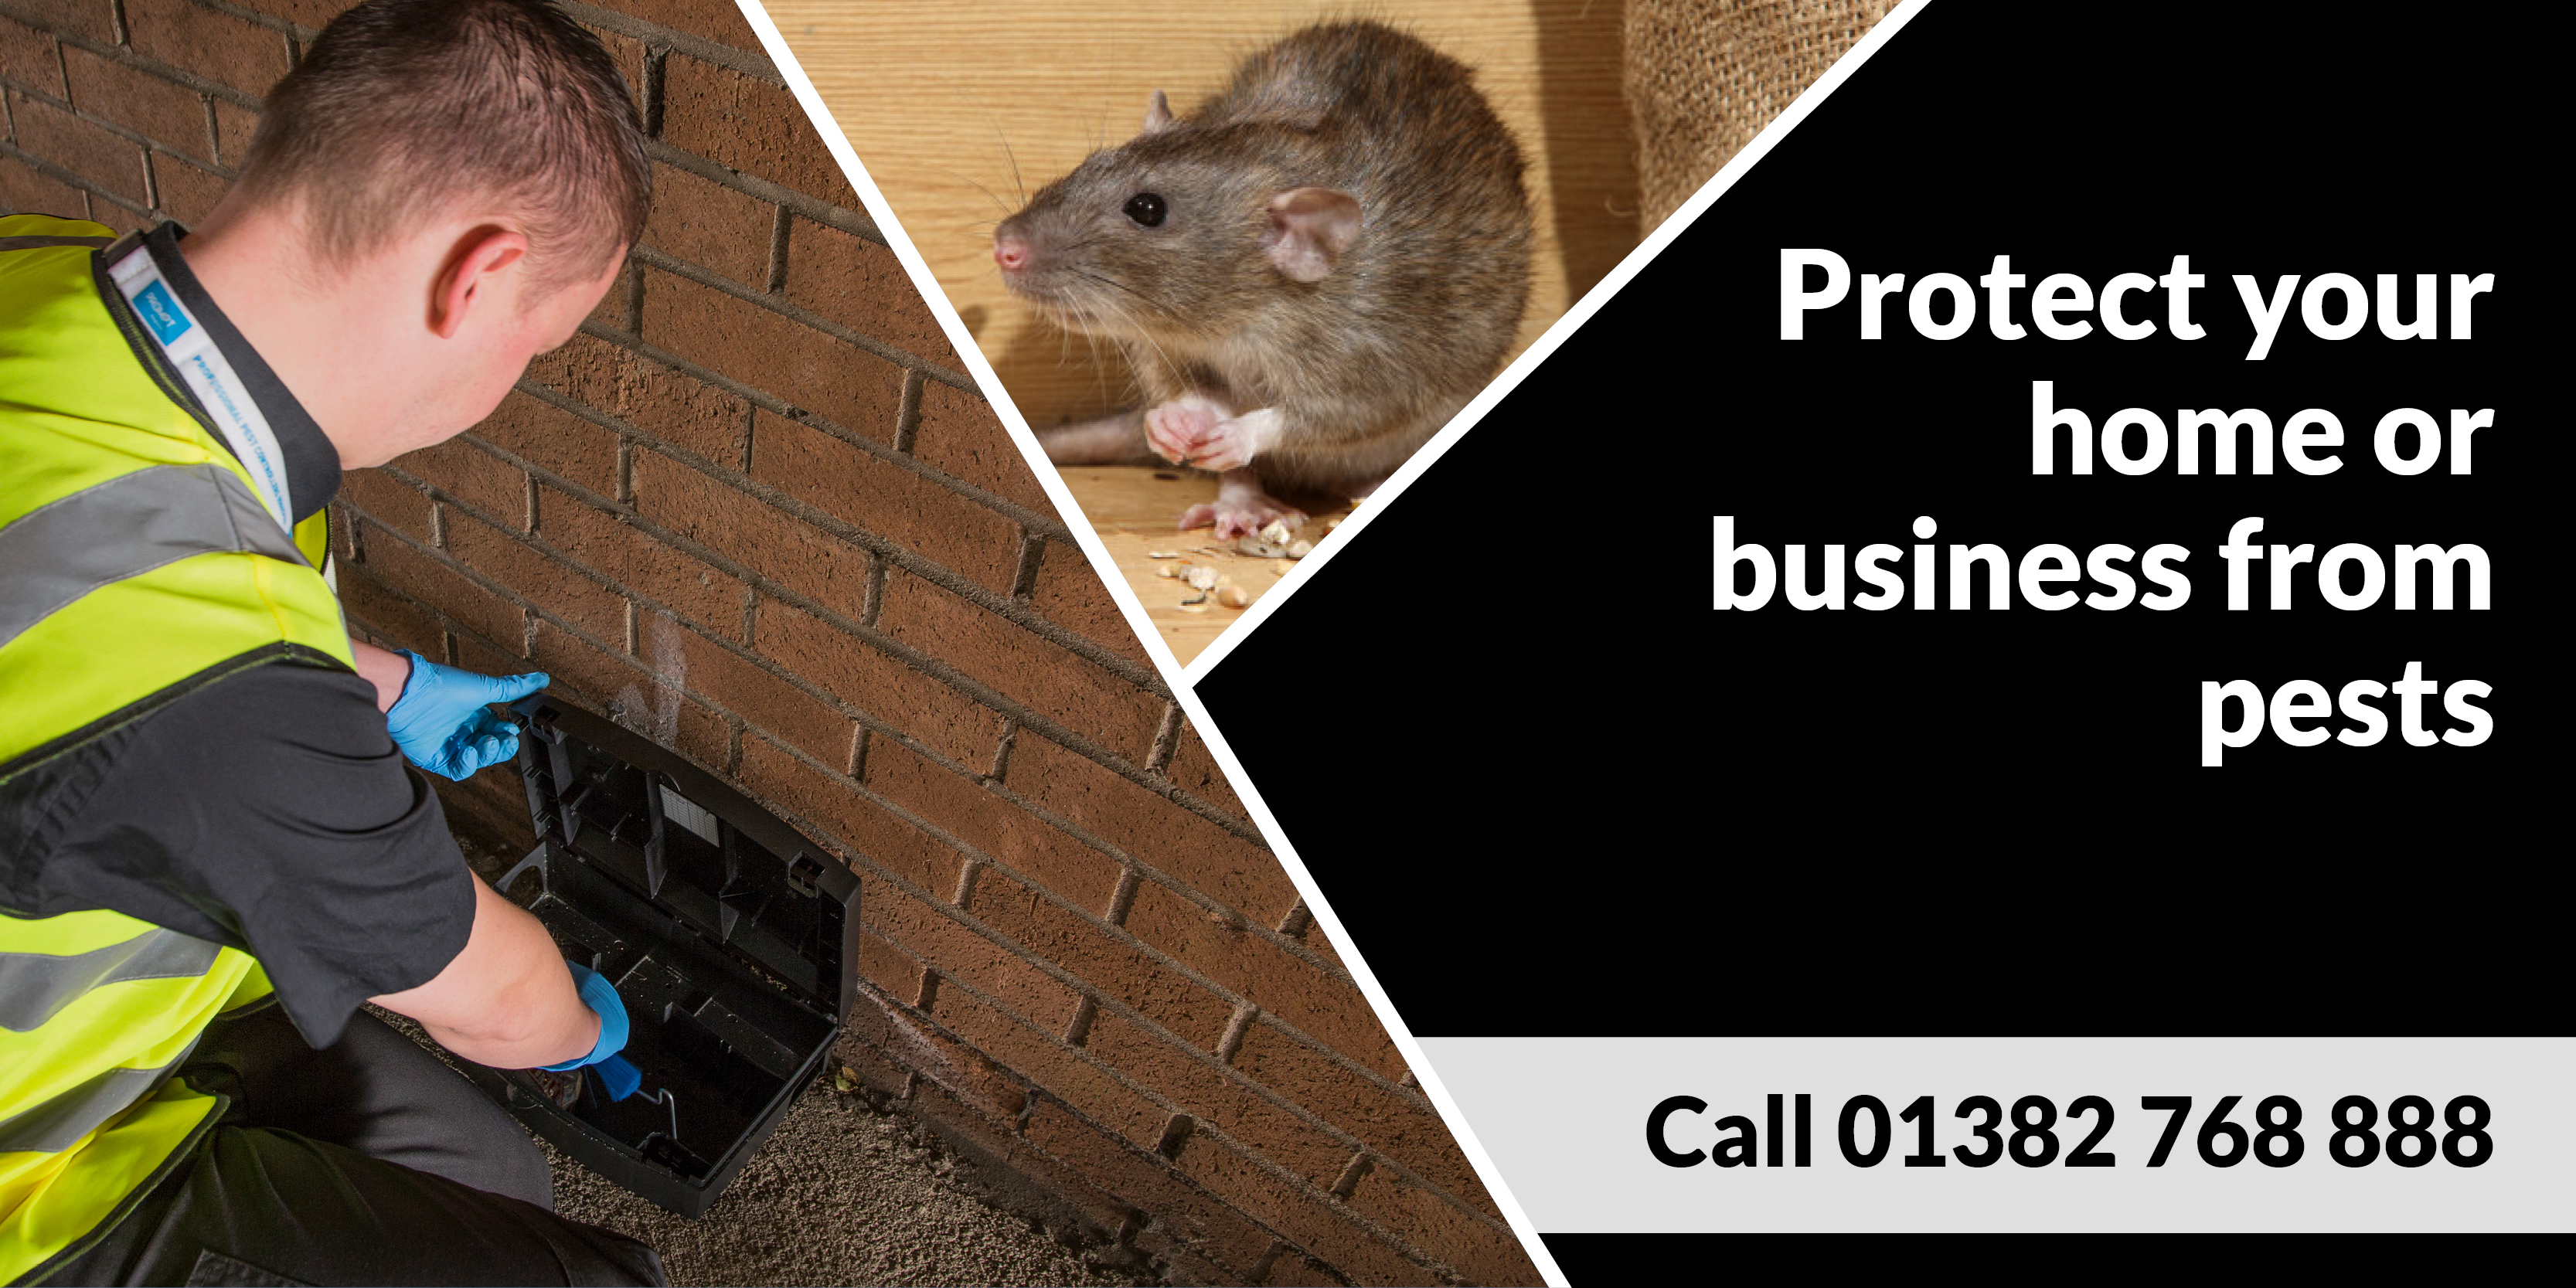 Pest Control Company Dundee Pest Solutions - Pest Solutions